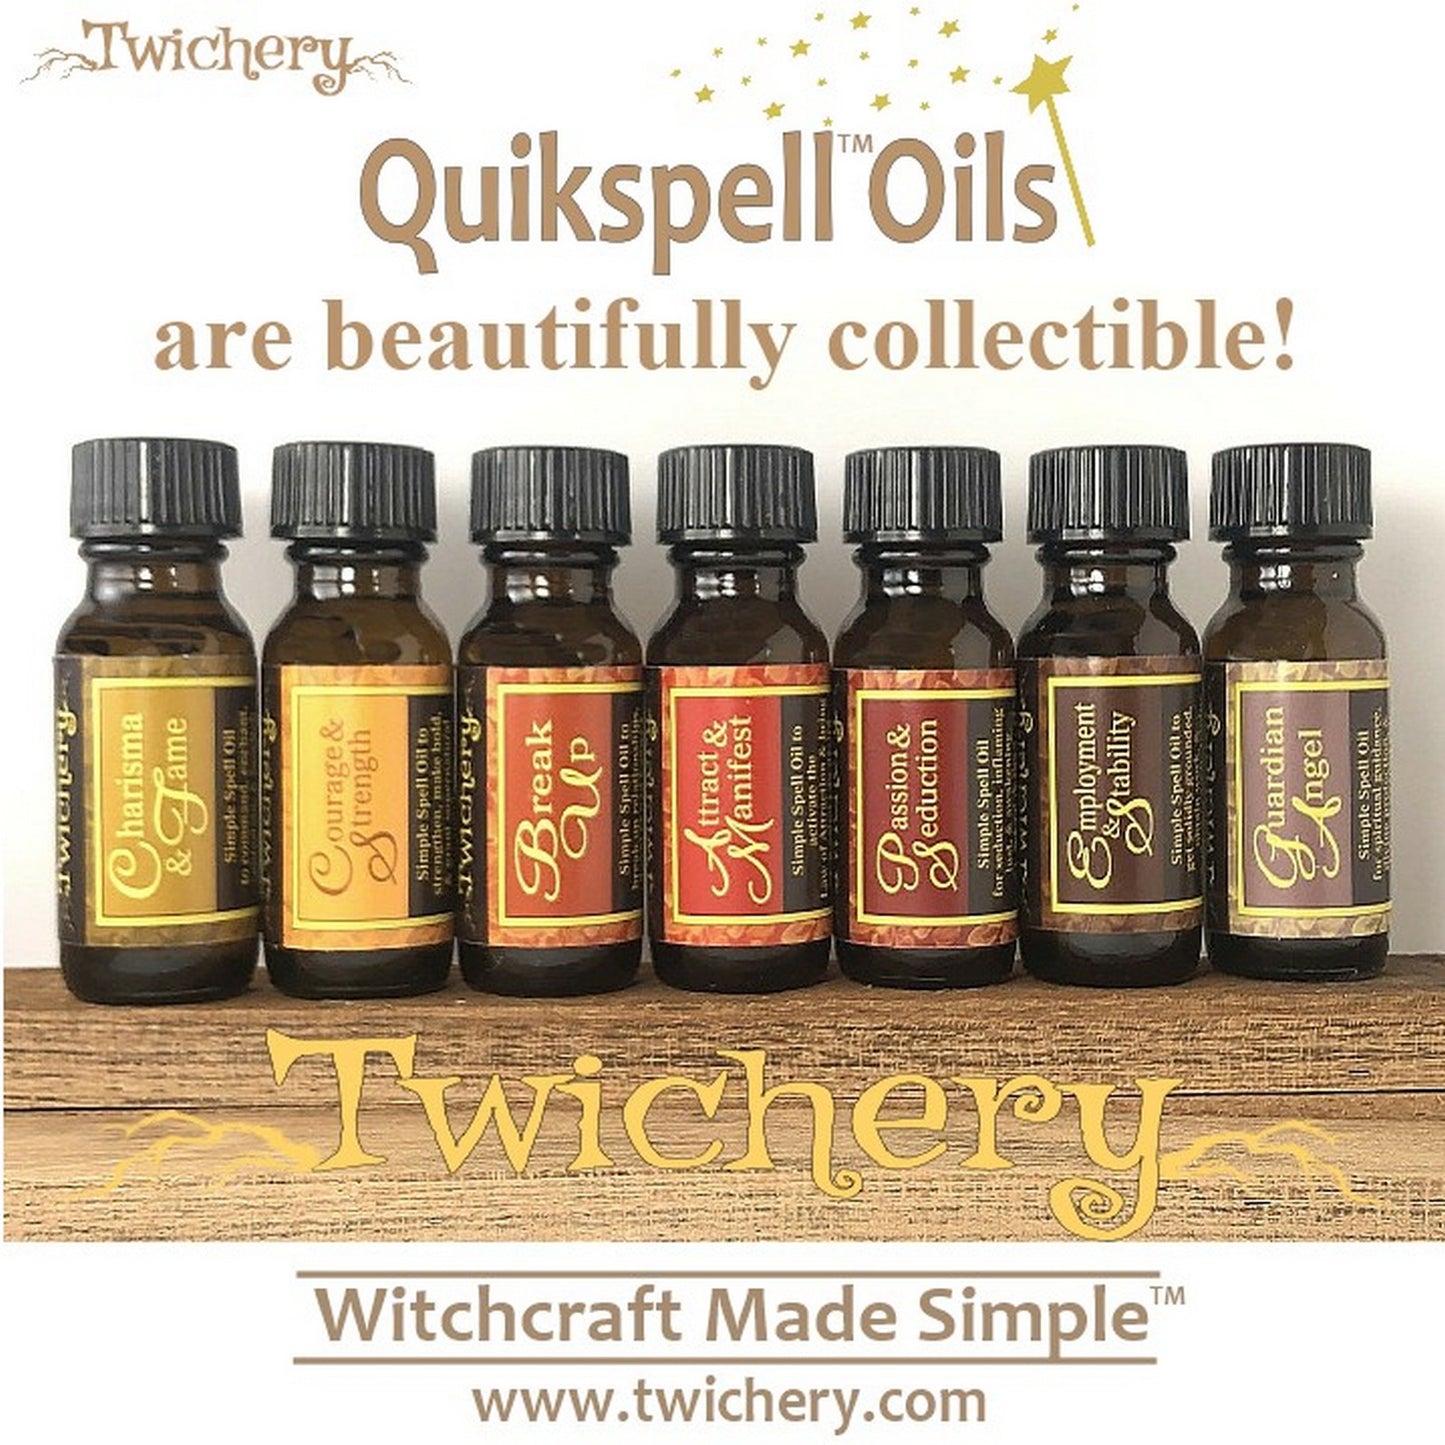 Collect all 24 Twichery Quikspell Oils for all your magickal needs, including establishing rapport with anyone!Hoodoo, Voodoo, Wicca, Witchcraft Made Simple